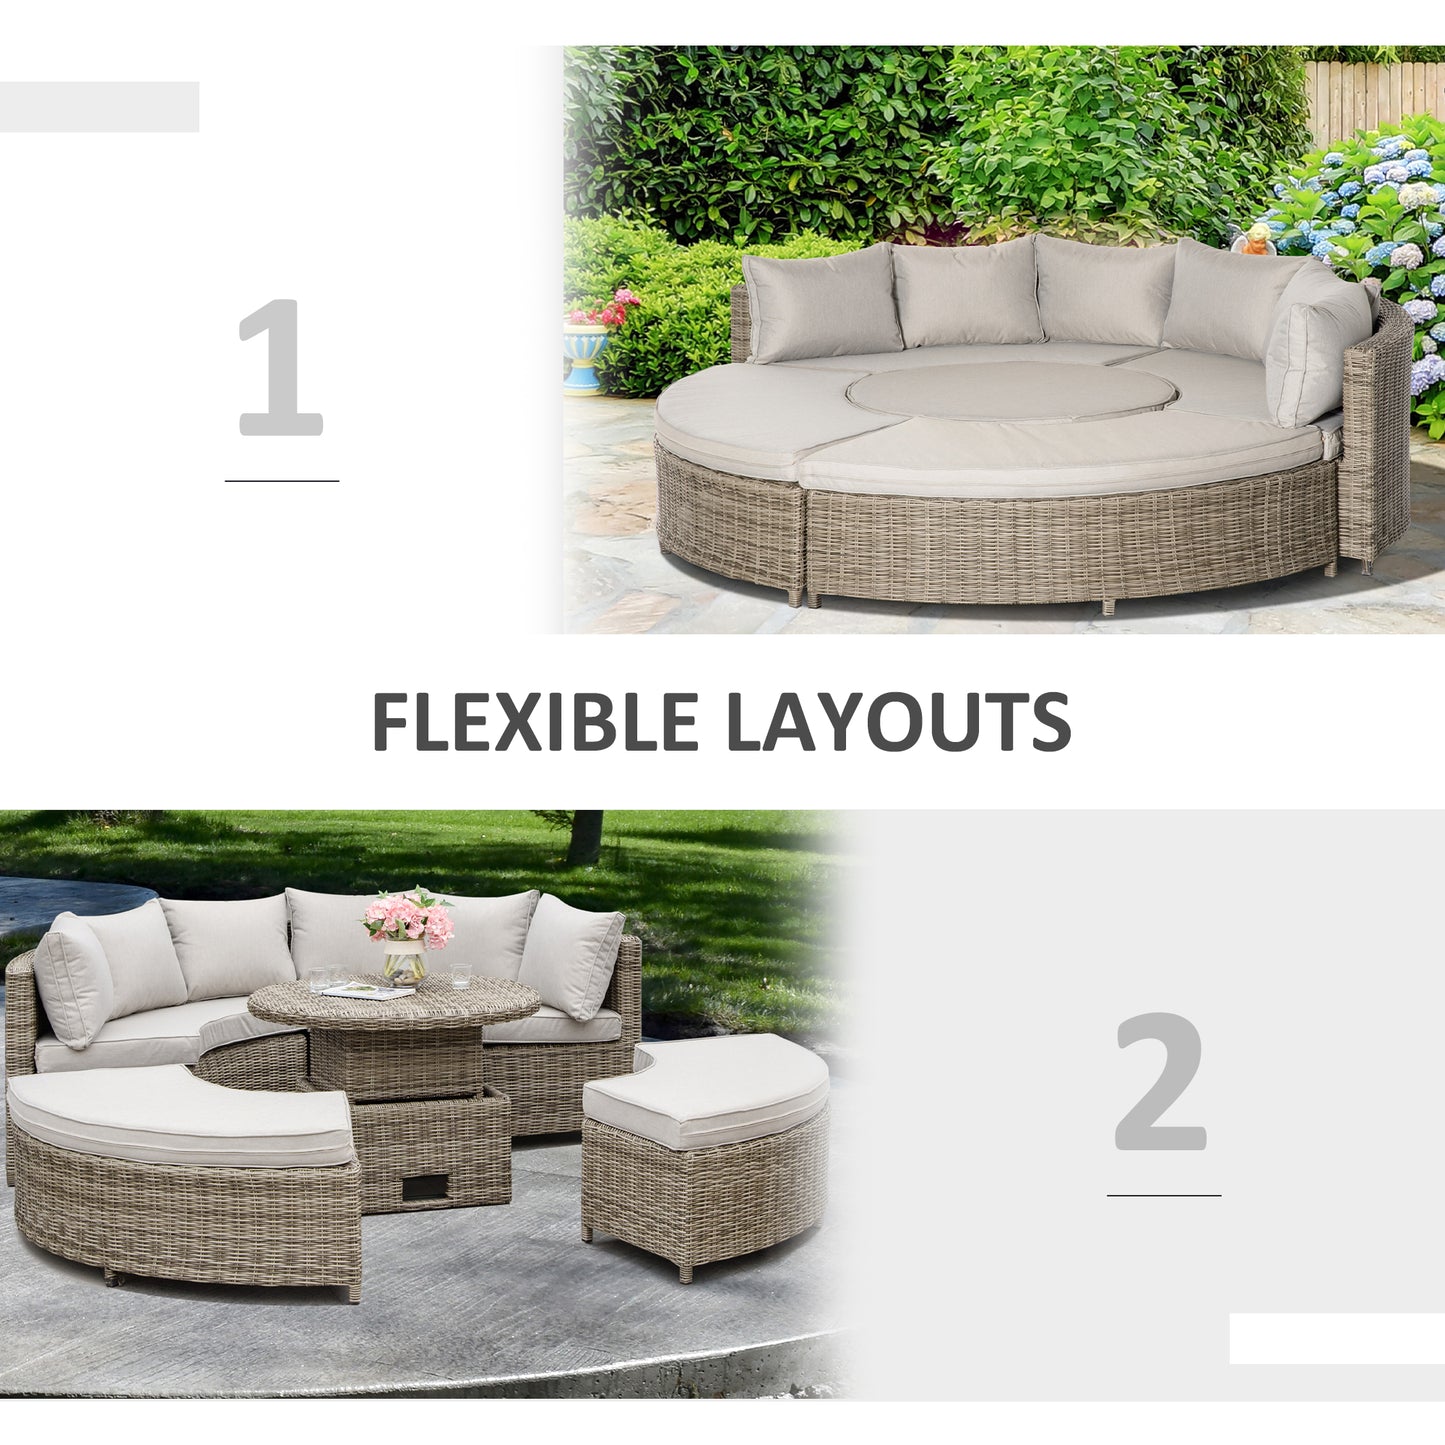 Outsunny 6-Seater Outdoor PE Rattan Patio Furniture Set Lounge Chair Round Daybed Liftable Coffee Table Conversation Set w/ Olefin Cushion, Grey